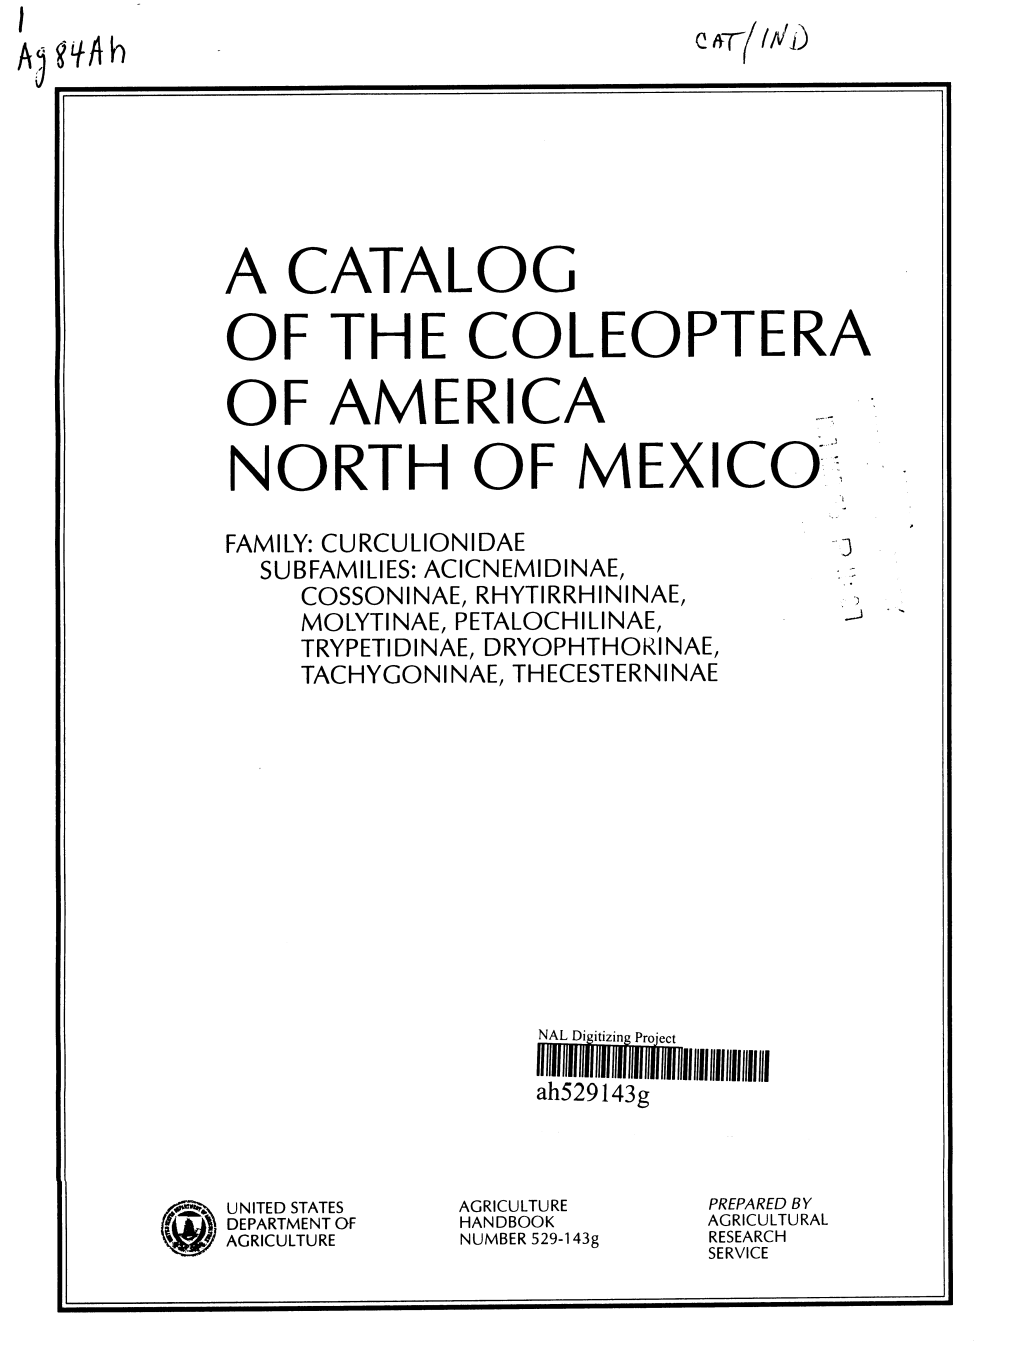 A Catalog of the Coleóptera of America North of Mexico^